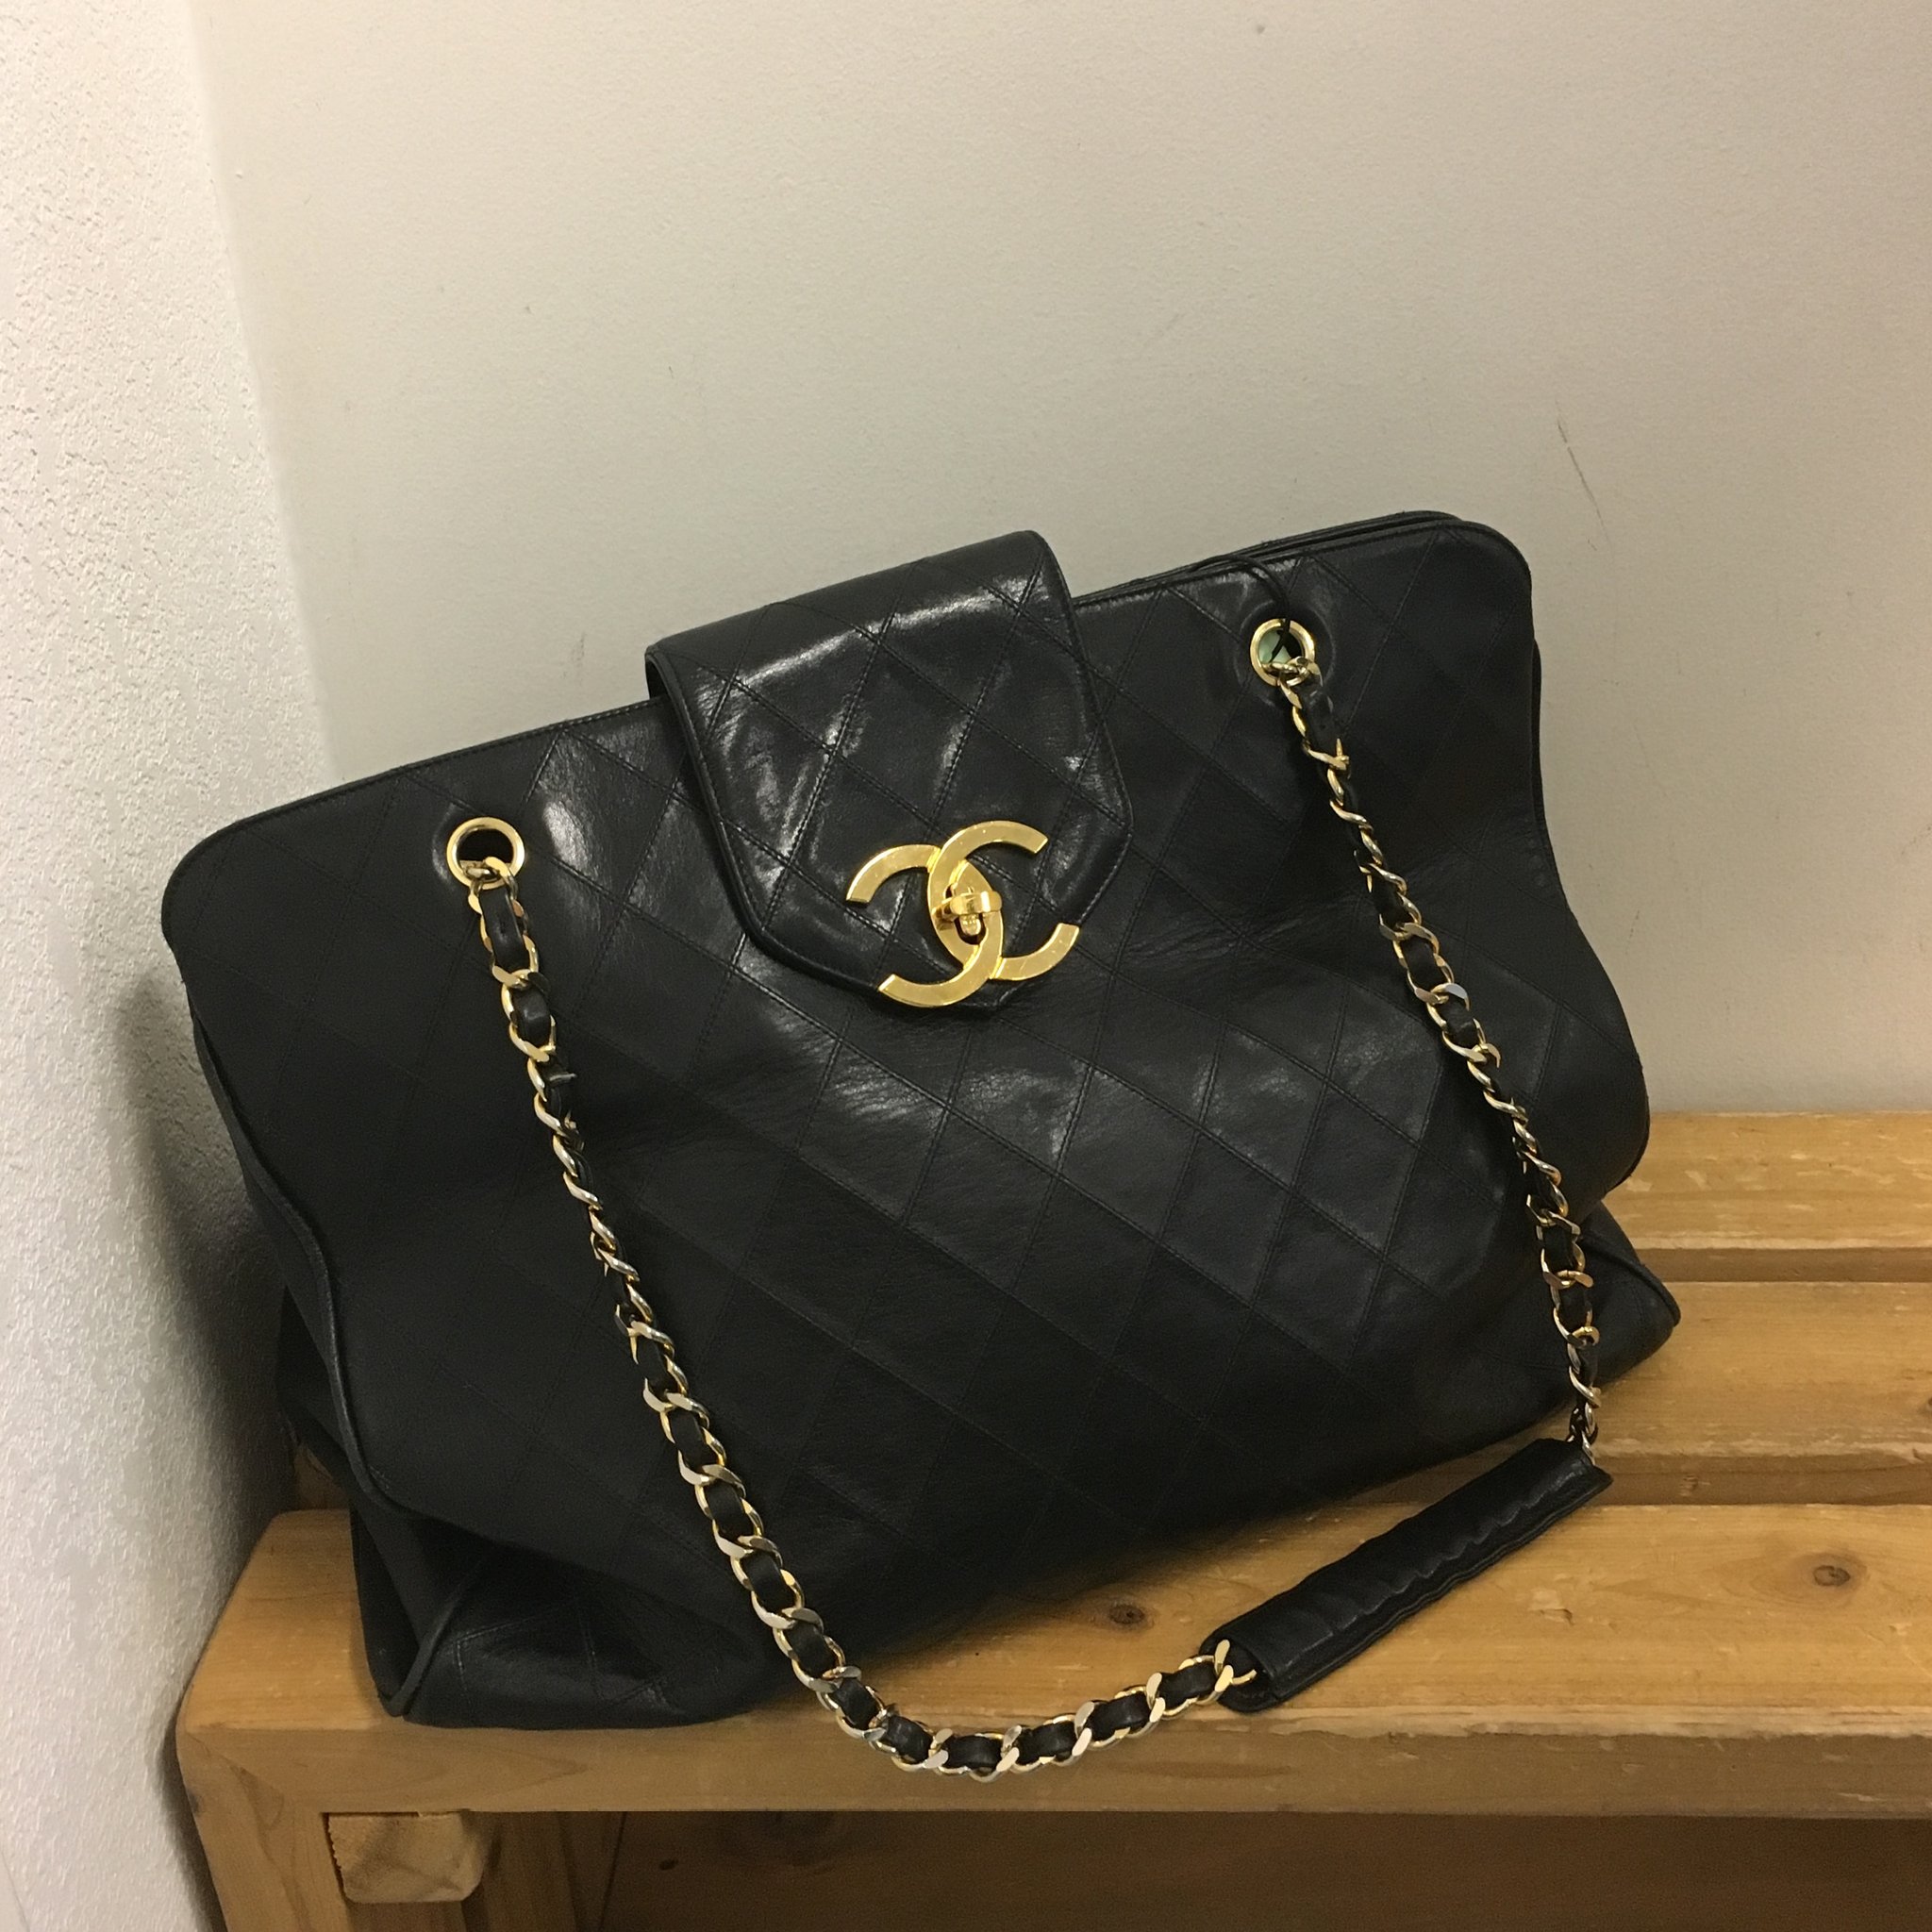 Rosebuds Consignment on X: This is a genuine black leather